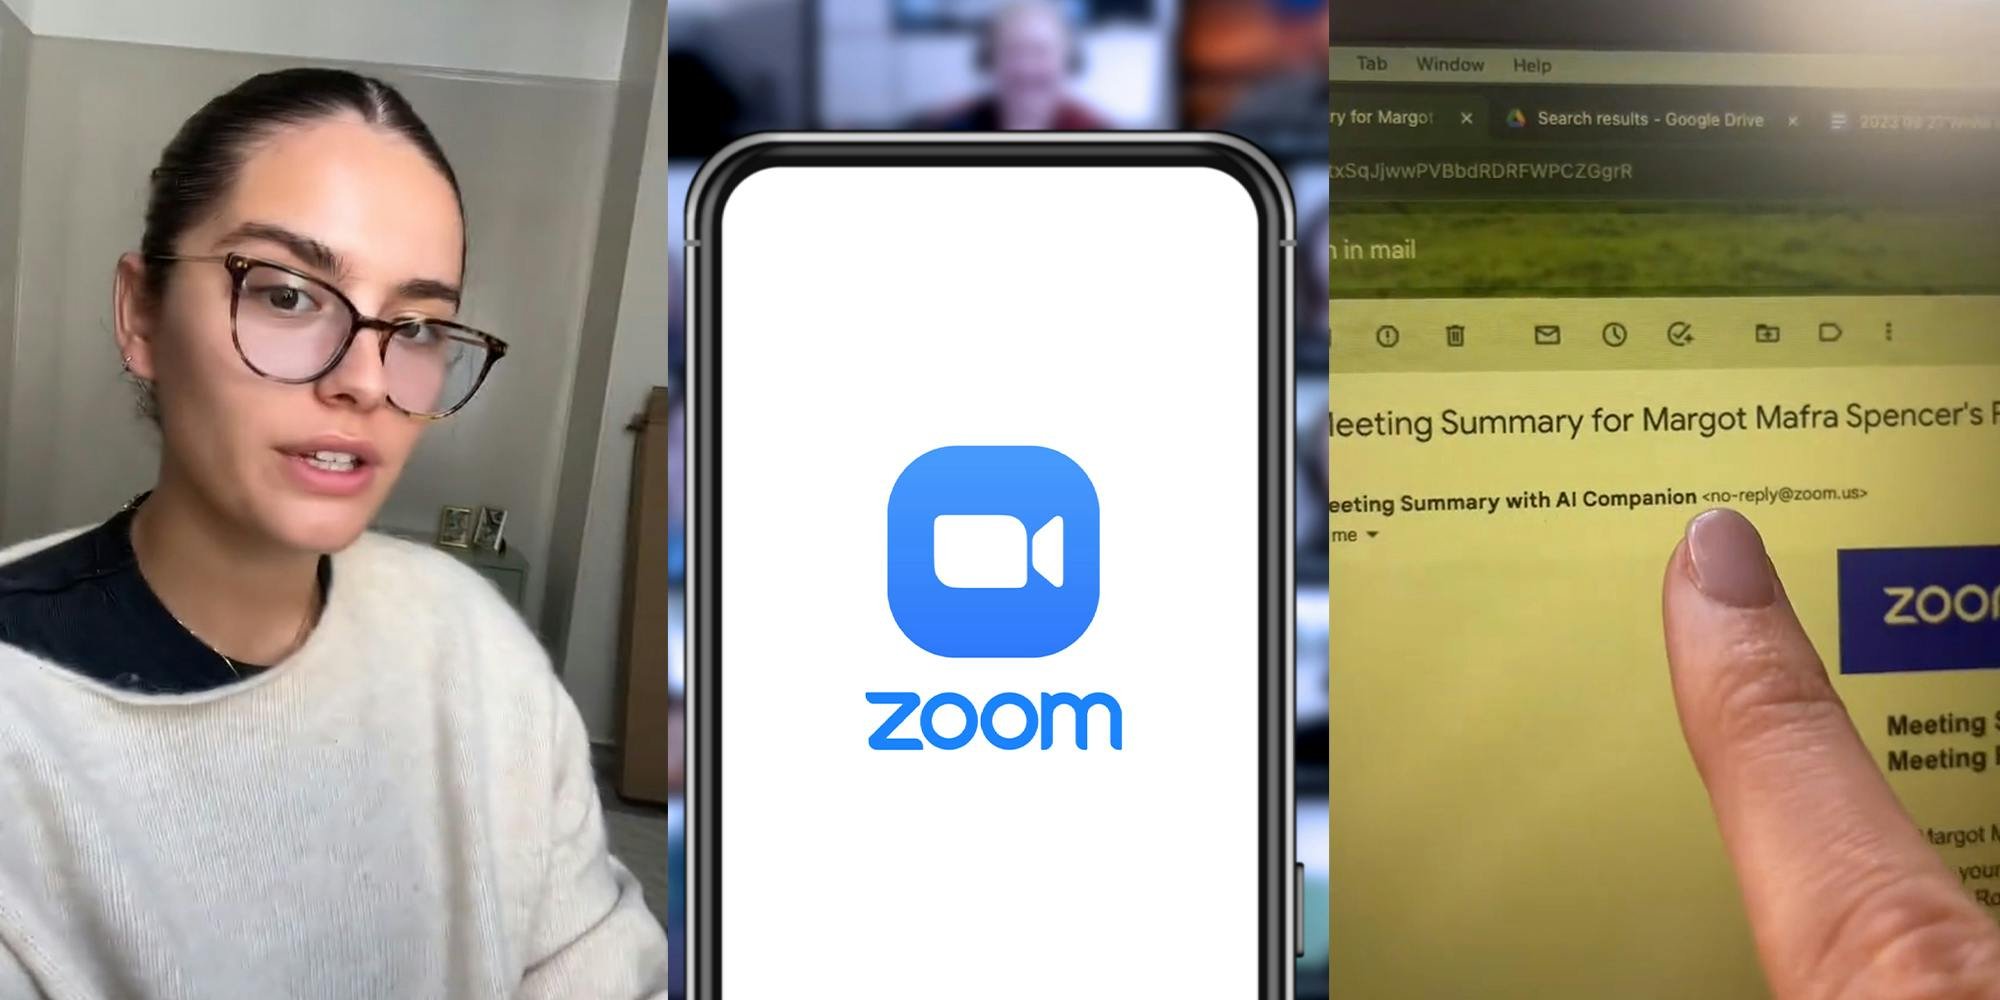 ‘This feels illegal’: Worker says Zoom AI Companion created summary of everything she said in a meeting without her knowledge